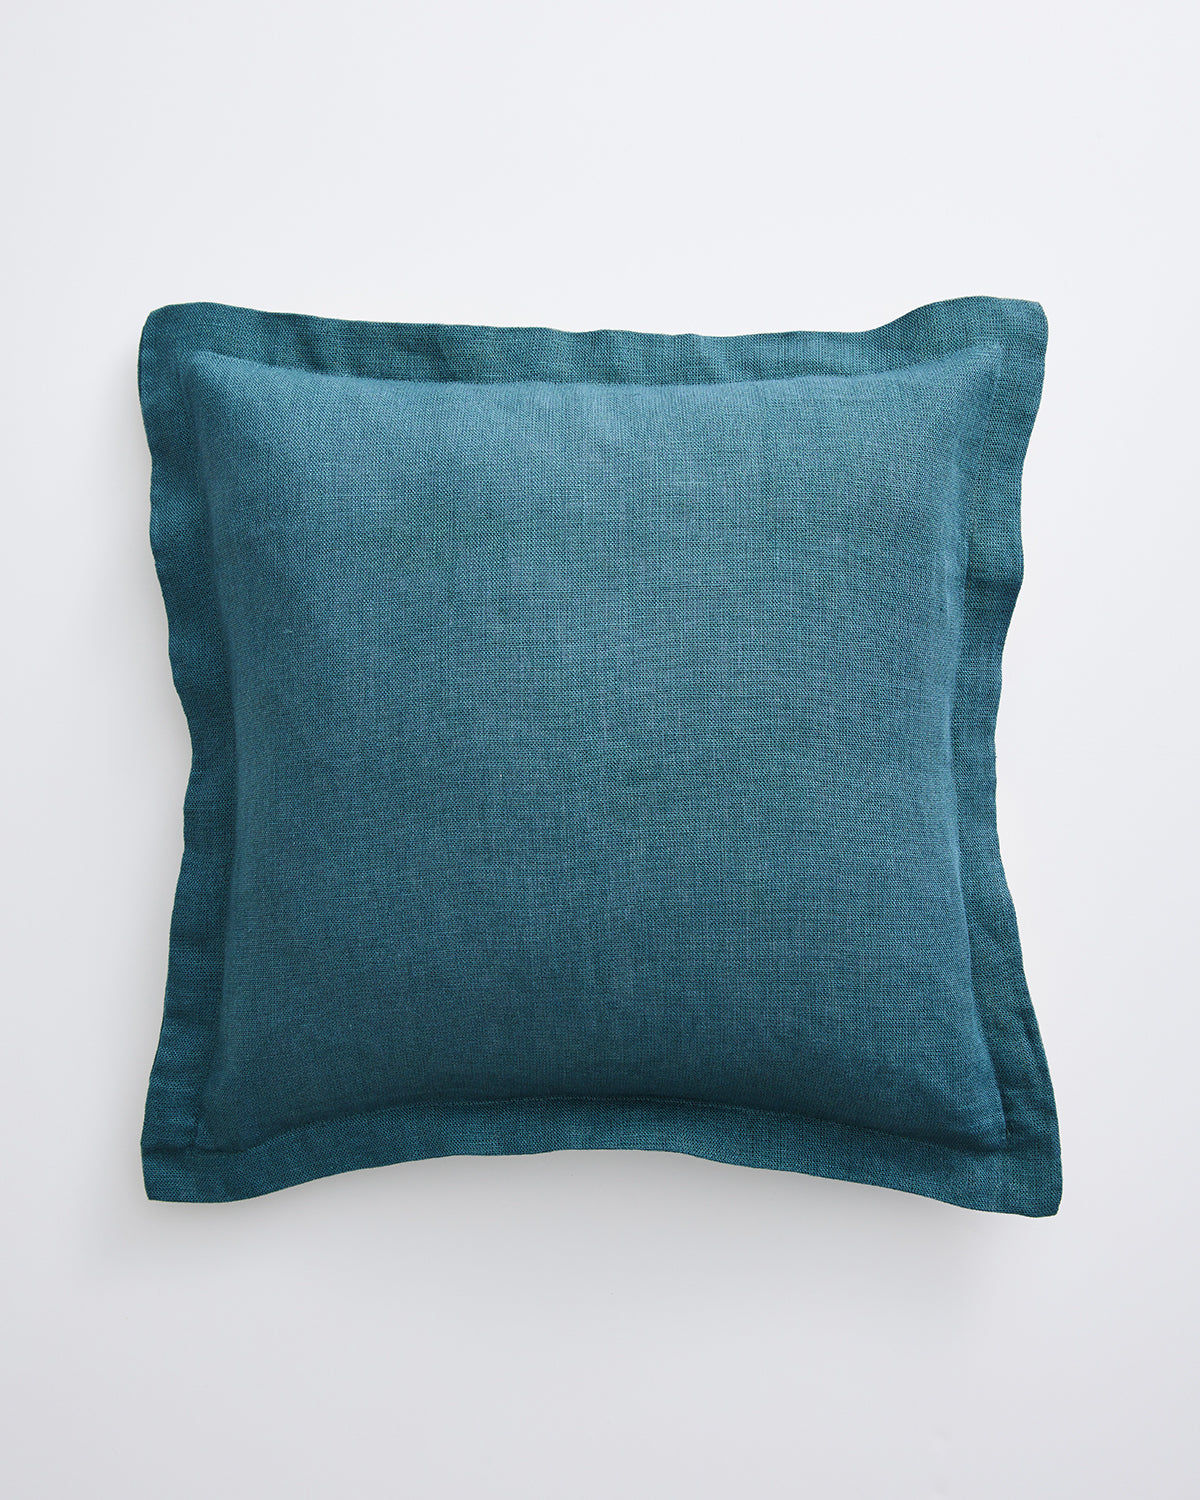 Image of Petrol 100% Linen Cushion Cover  